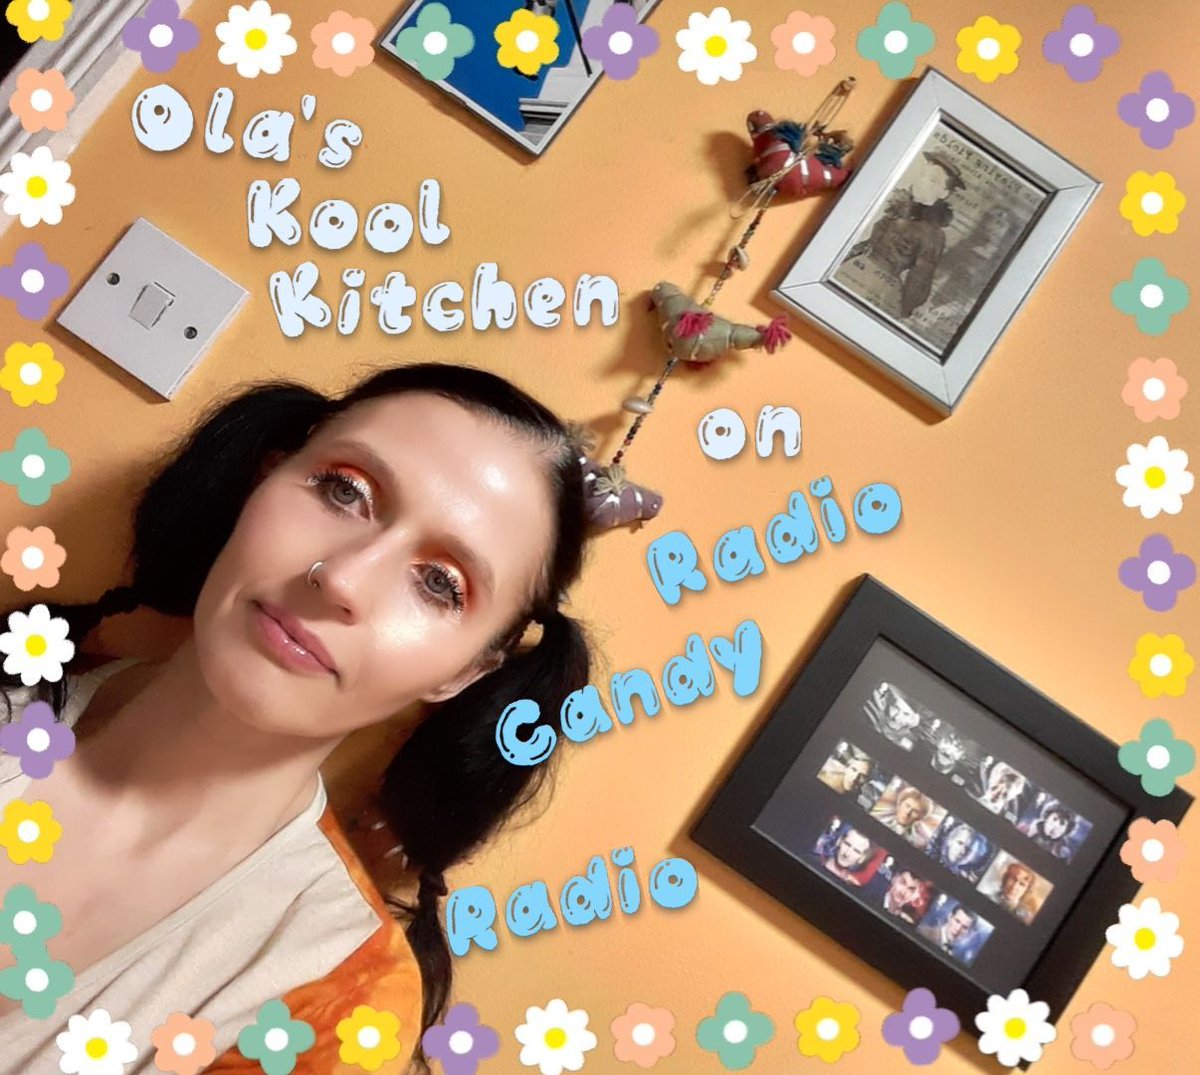 @OlasKoolKitchen NOW on #radiocandyradio a lovely bubble bath of sounds from @toughage @smellybdrmm @laluzers & @mannequinpussy buff.ly/3kN9kX5